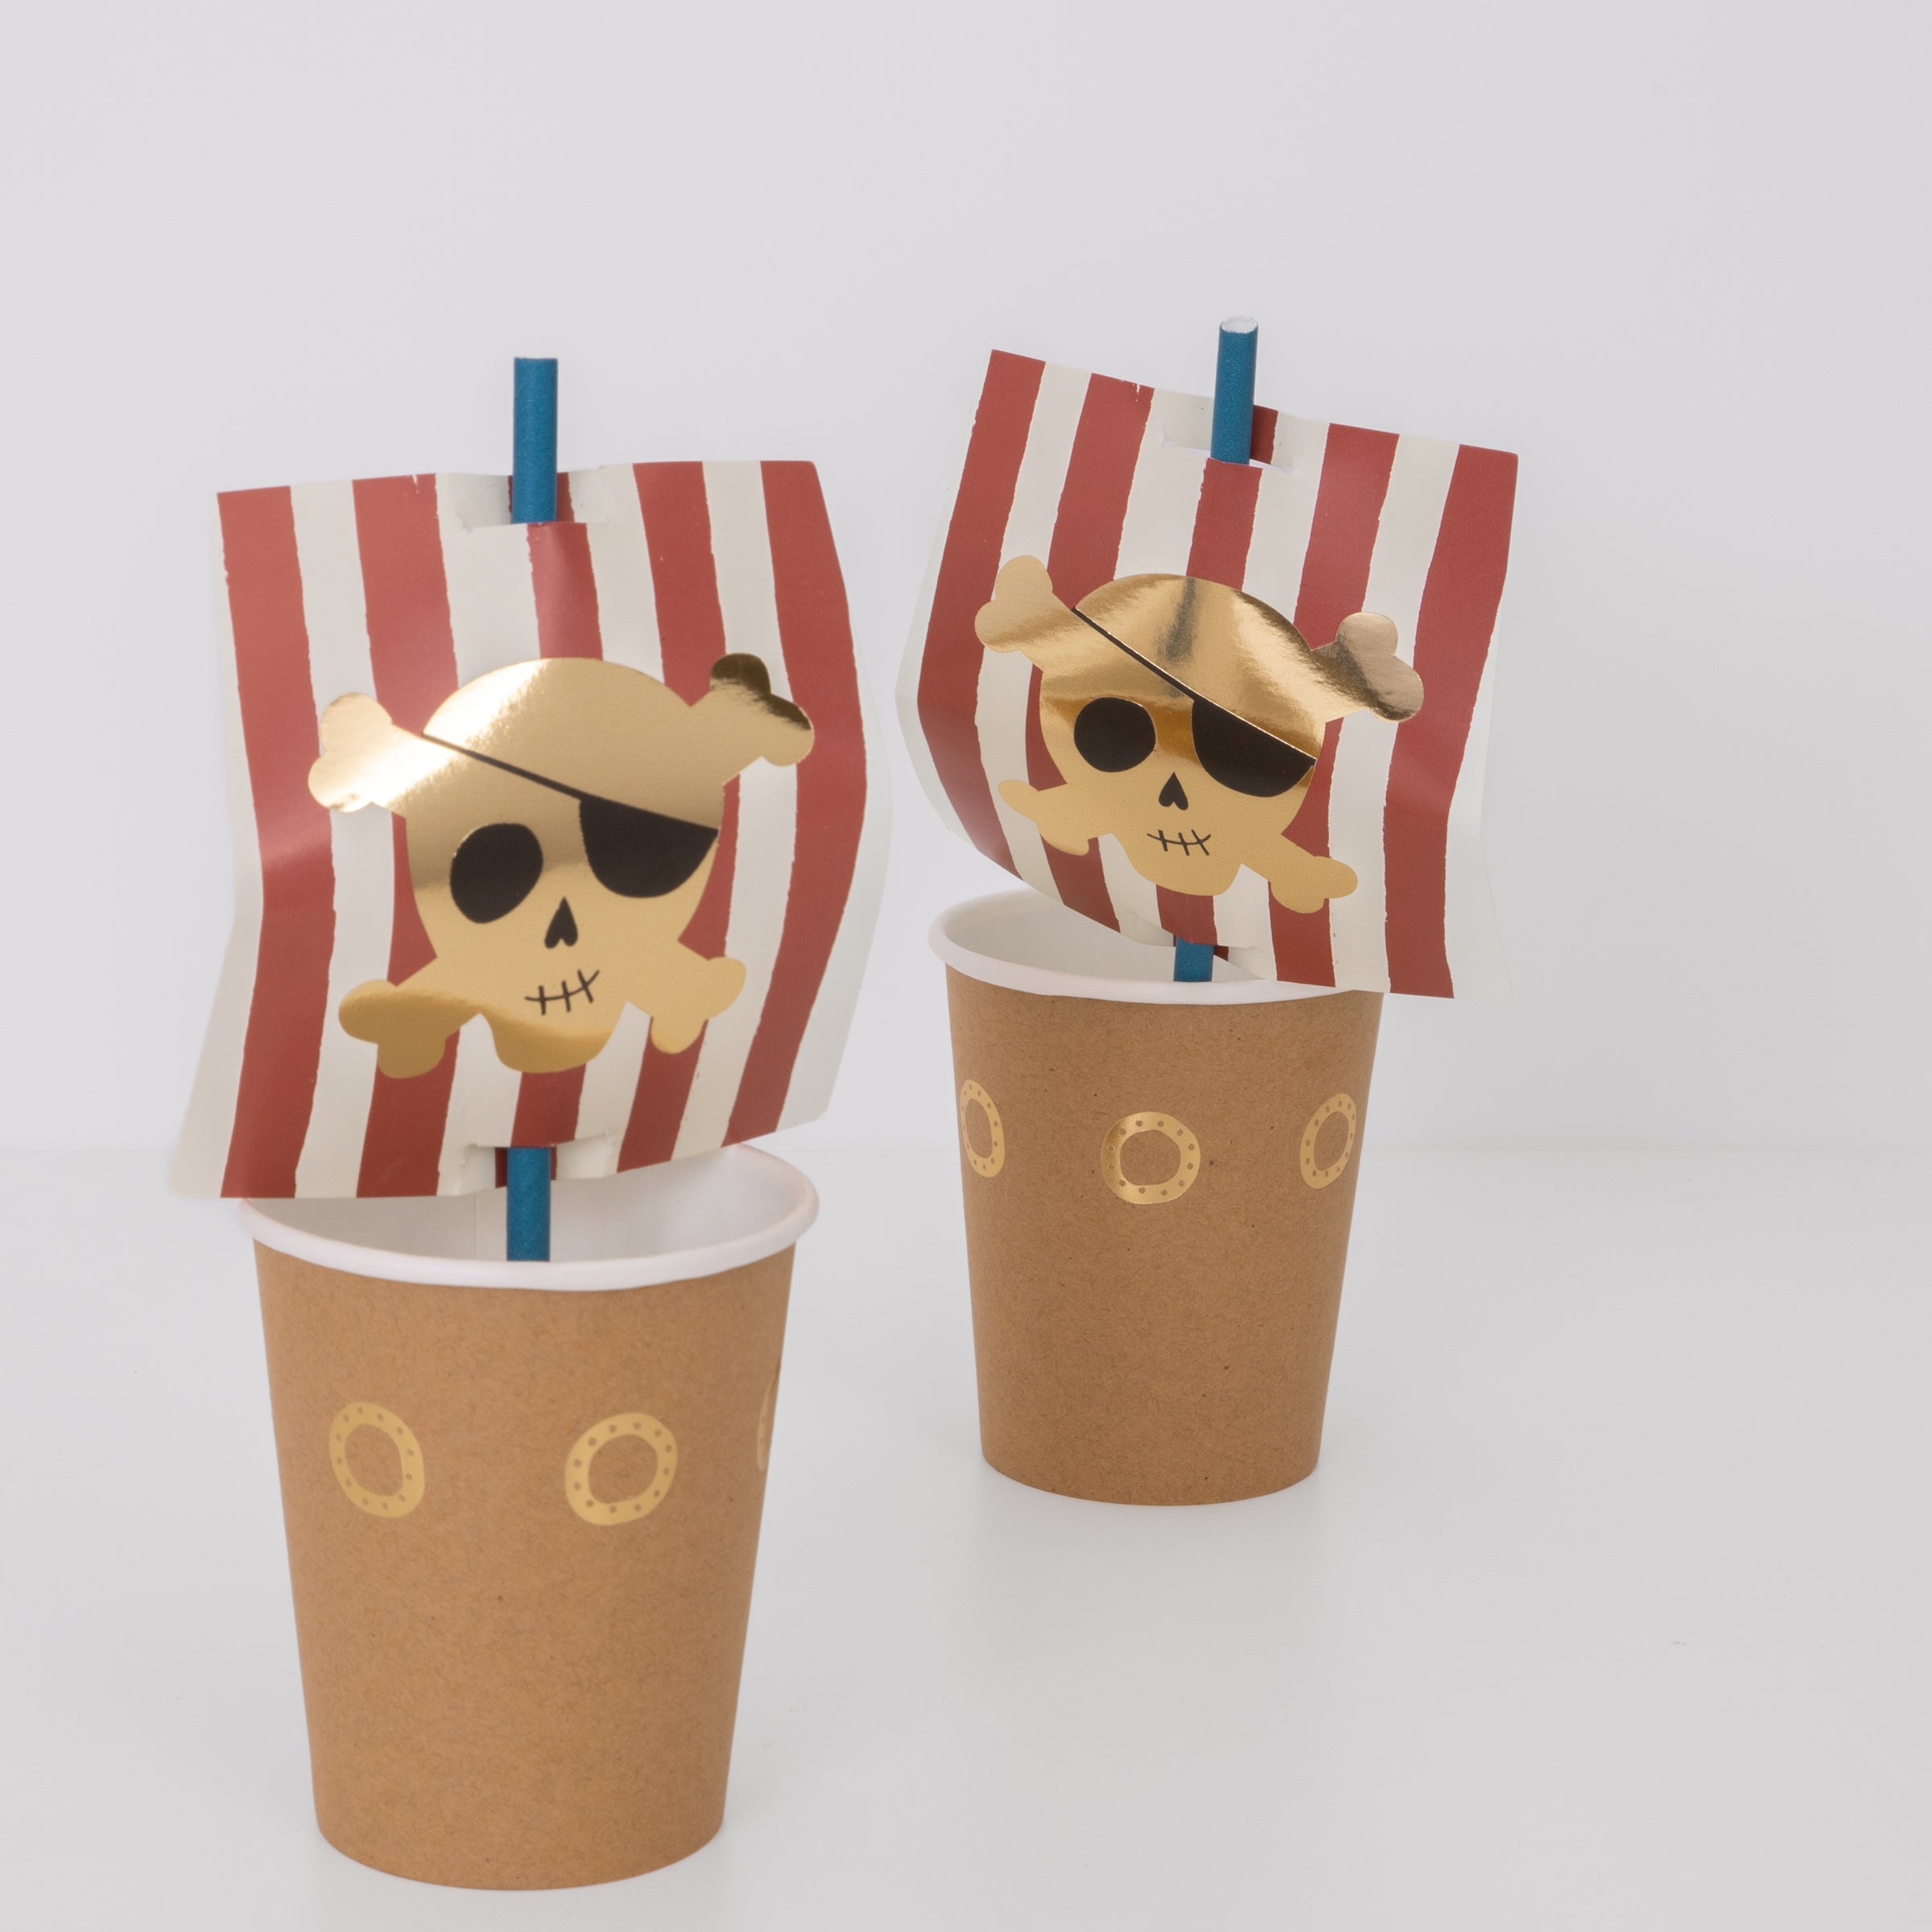 Our paper cups come with paper straws and a pirate sail, perfect for a pirate birthday party.